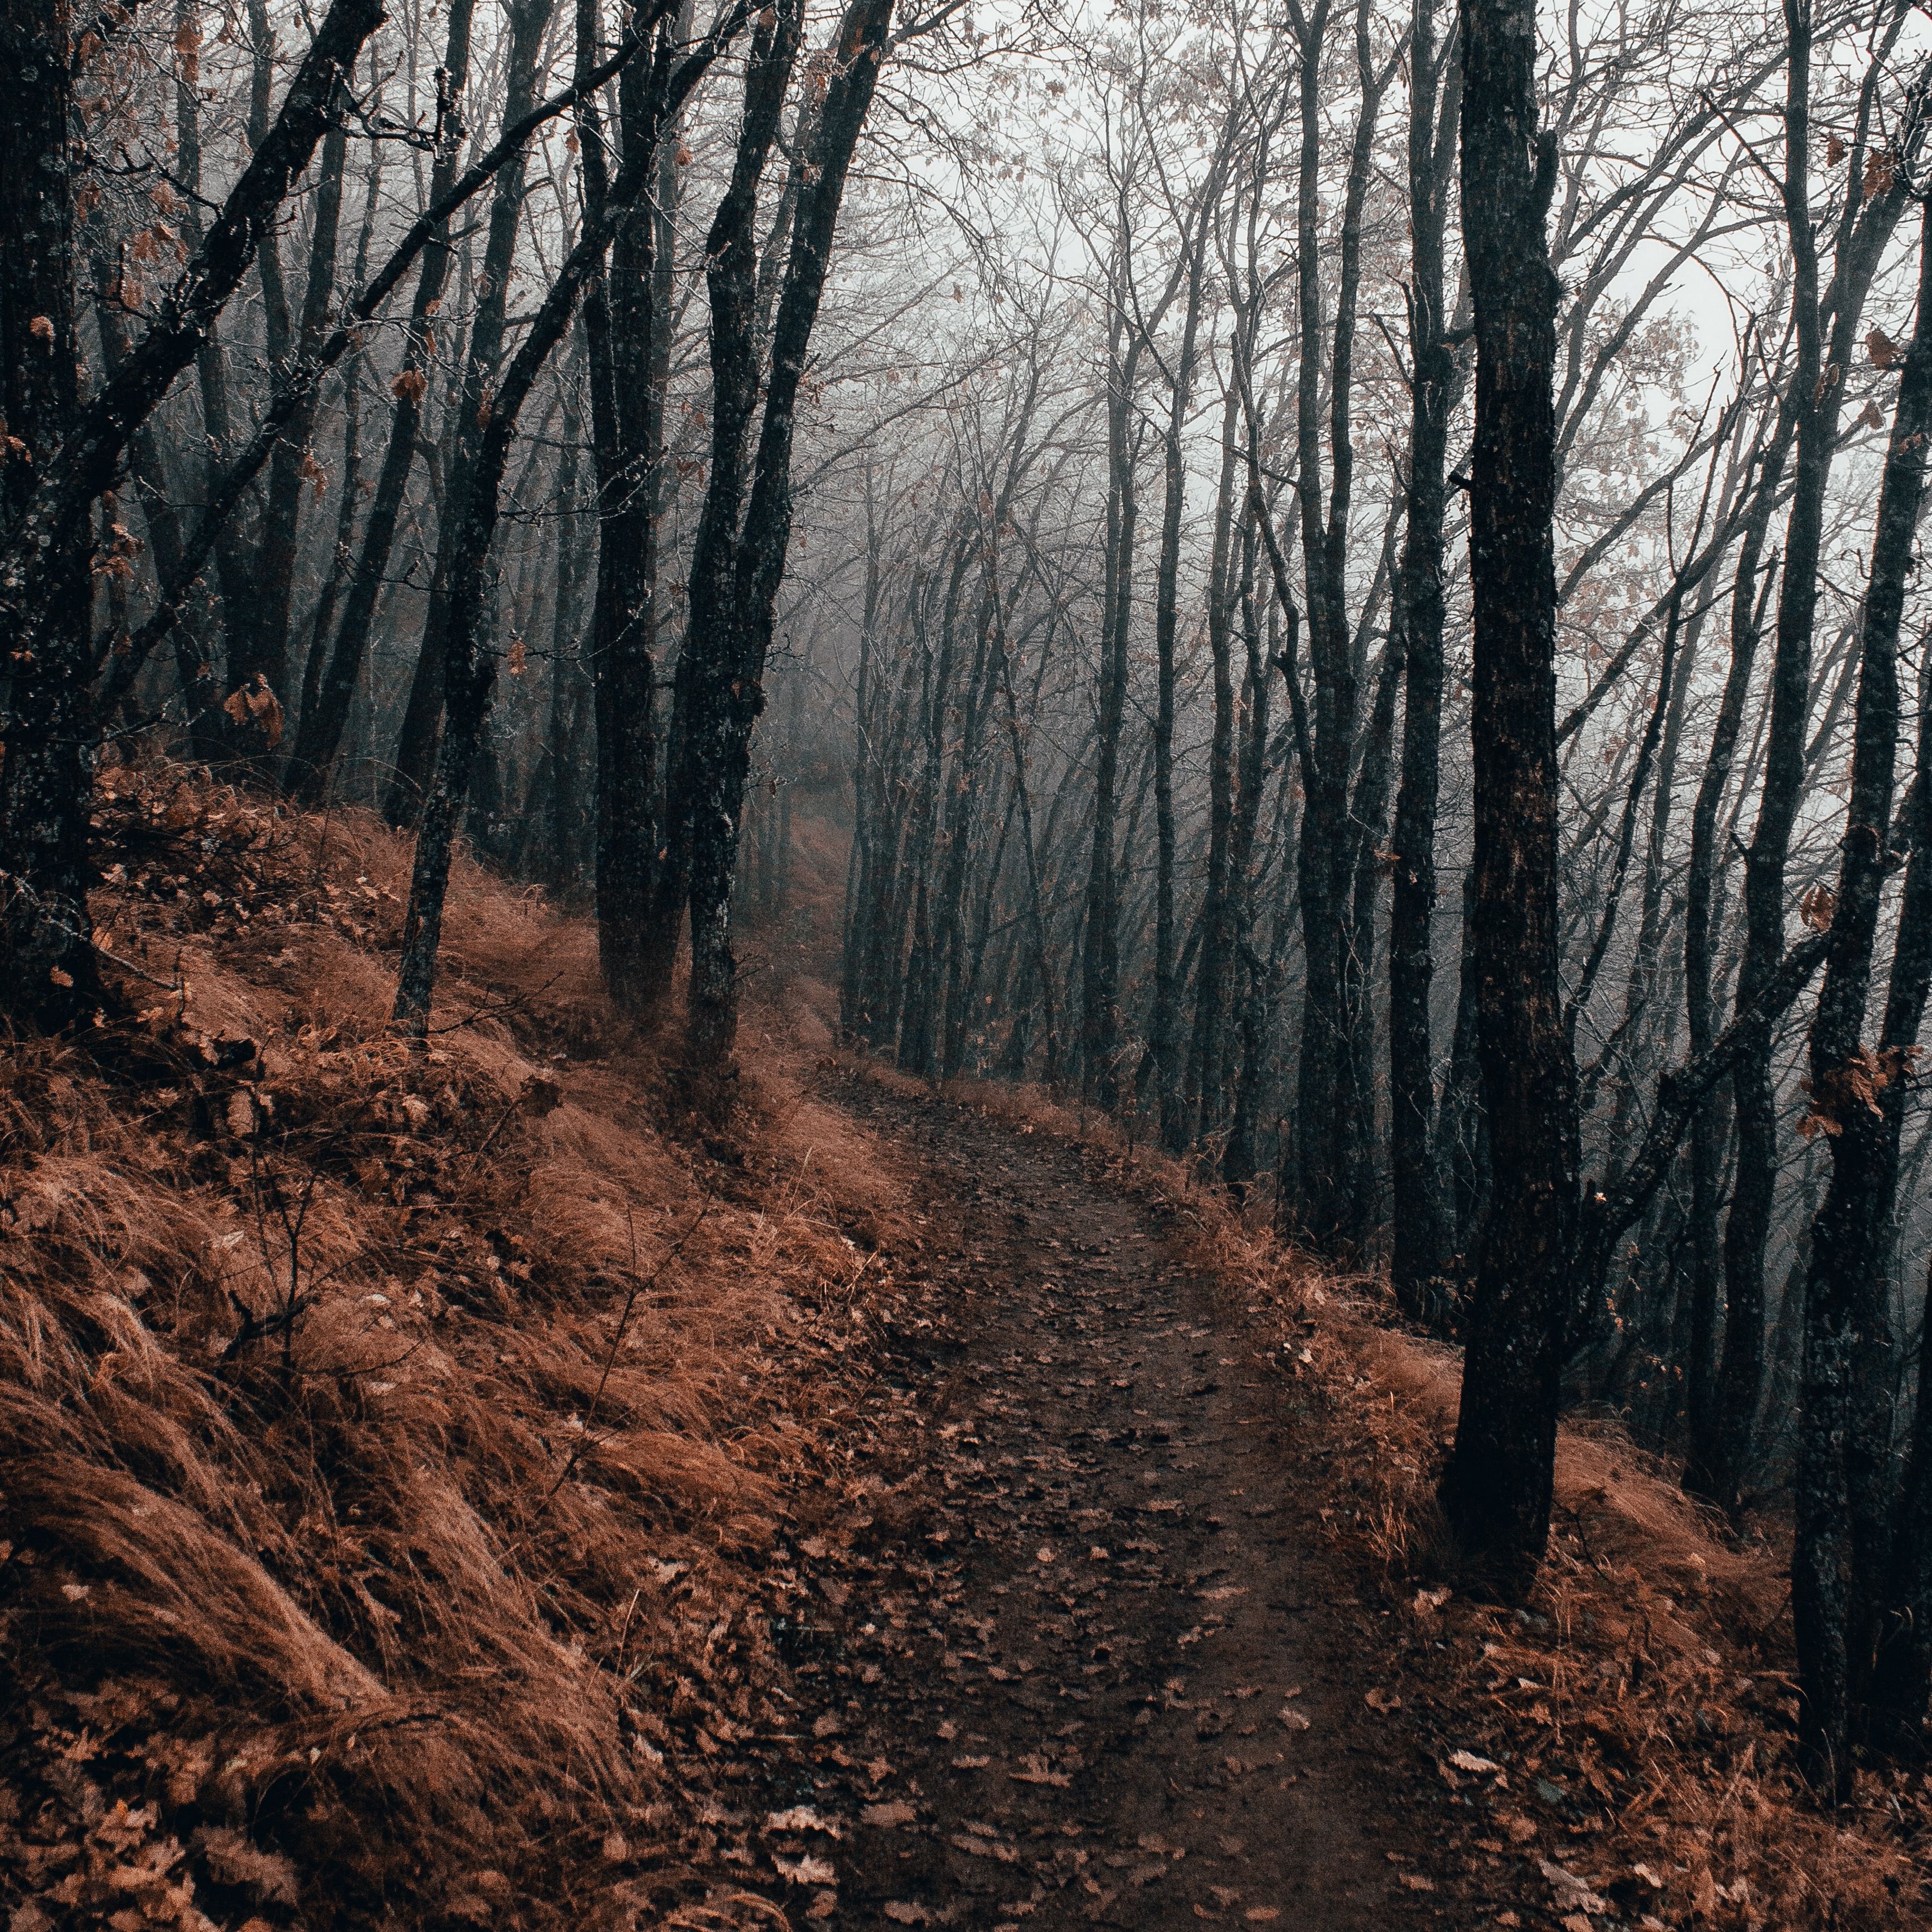 Download wallpaper 3415x3415 forest, path, fog, autumn, nature